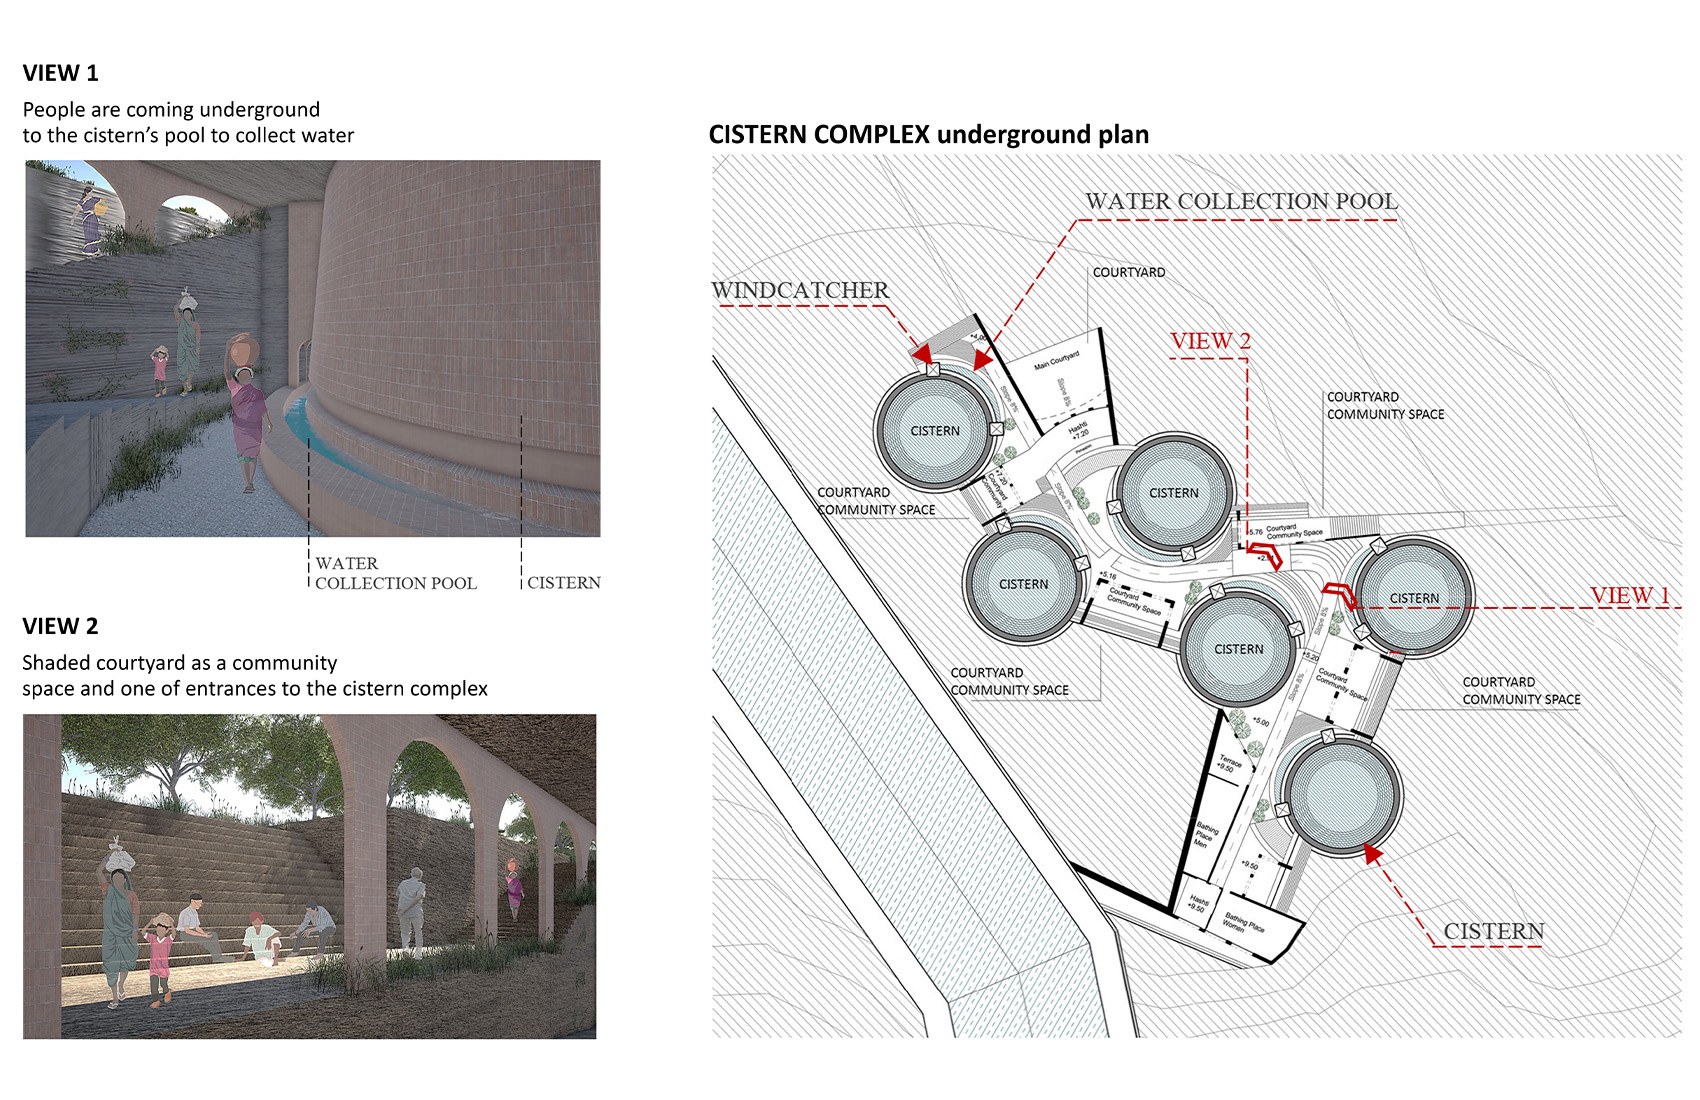 Azadeh Raoufi's thesis project cistern complex underground plan